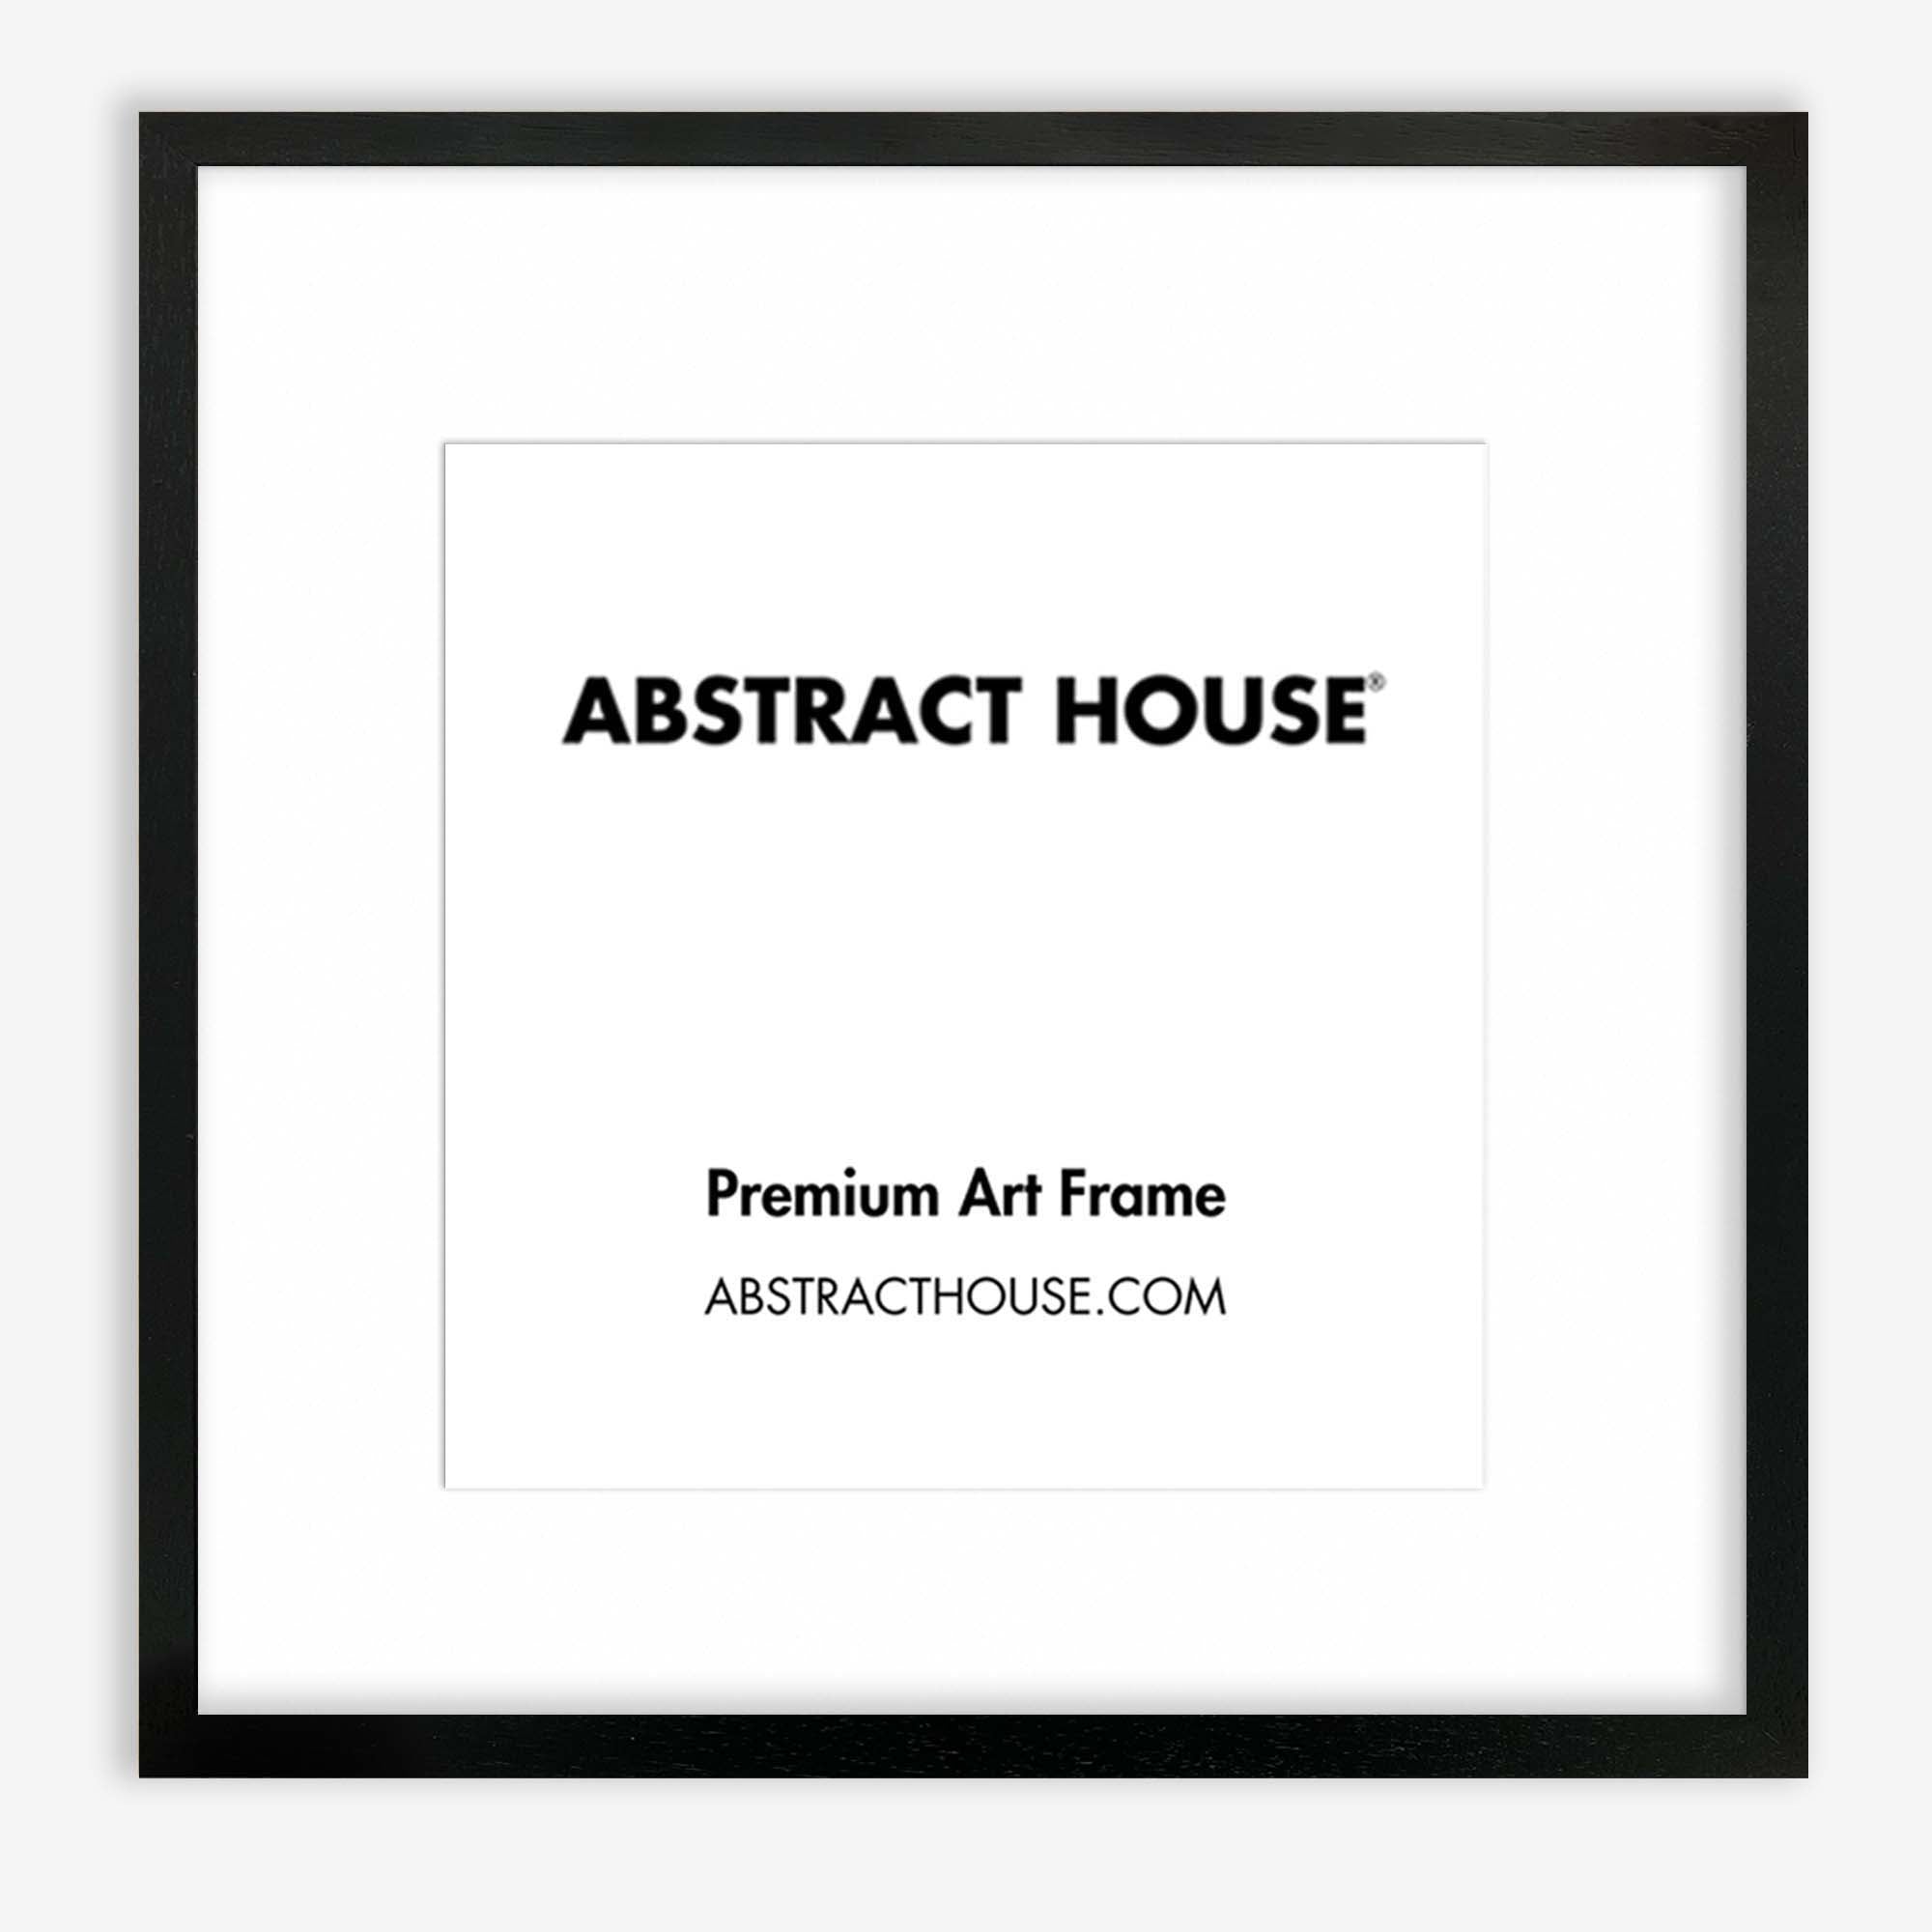 100x100 cm Wooden Frame-Black-70 x 70 cm / 27.5 x 27.5 Inches-Abstract House